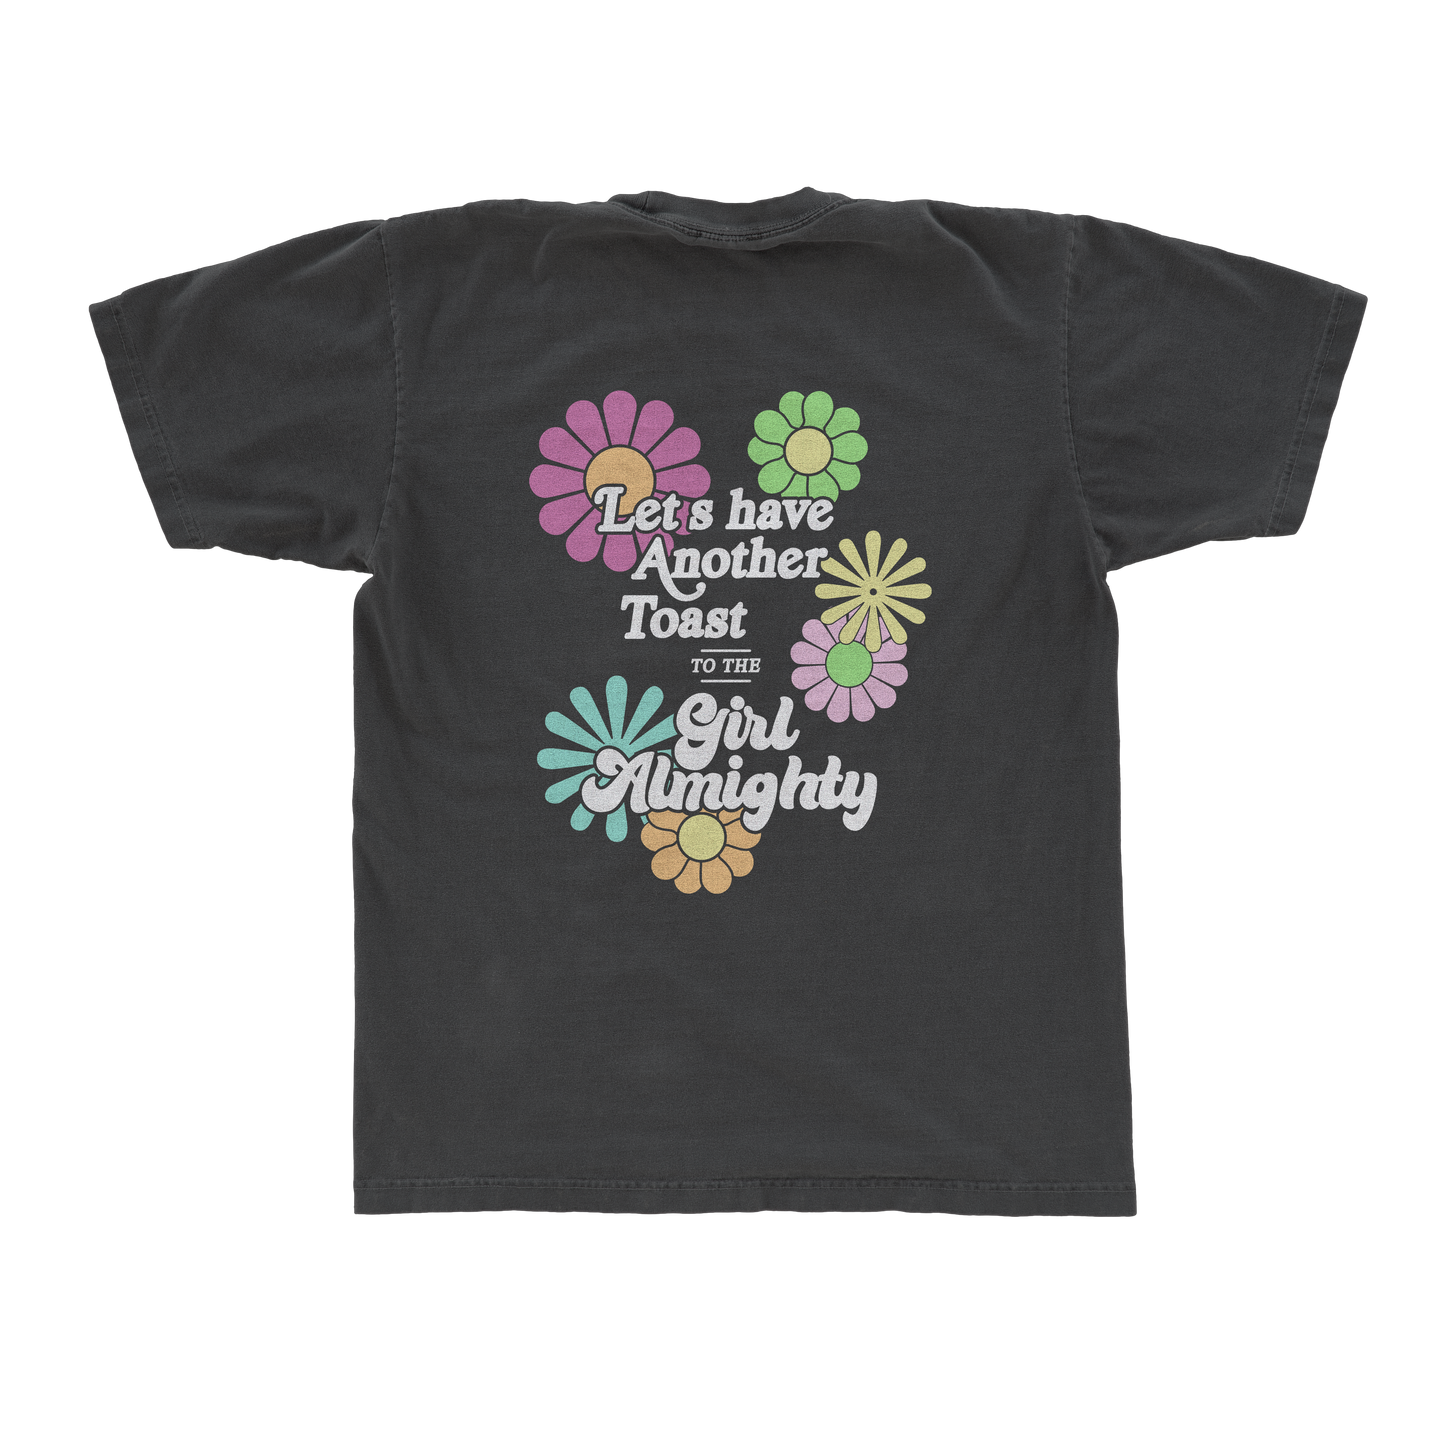 One Direction "Girl Almighty" Flower Power Tee